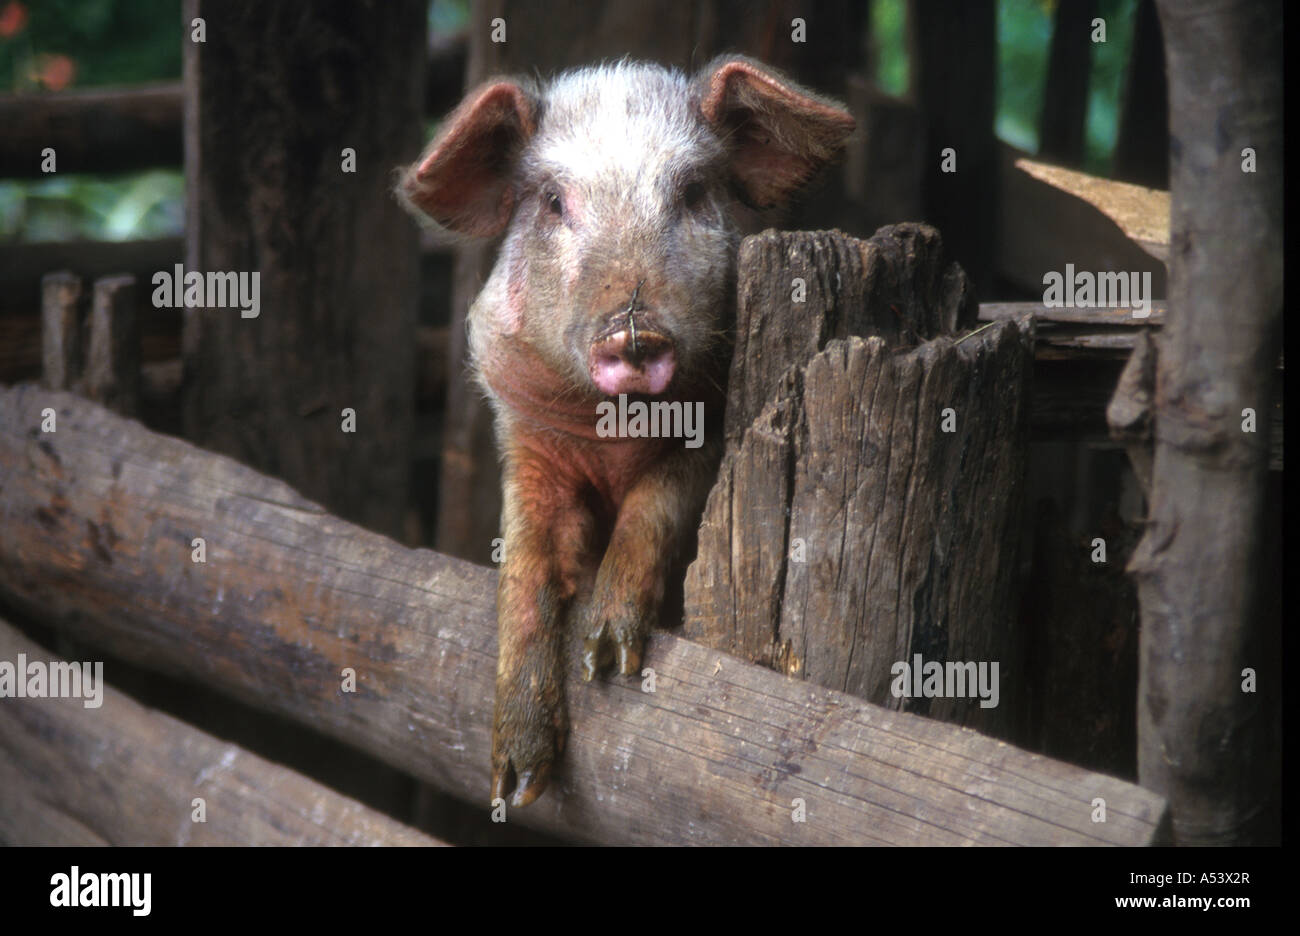 Painet ha2250 5040 guatemala farming pig quetzaltenango country developing nation less economically developed culture Stock Photo